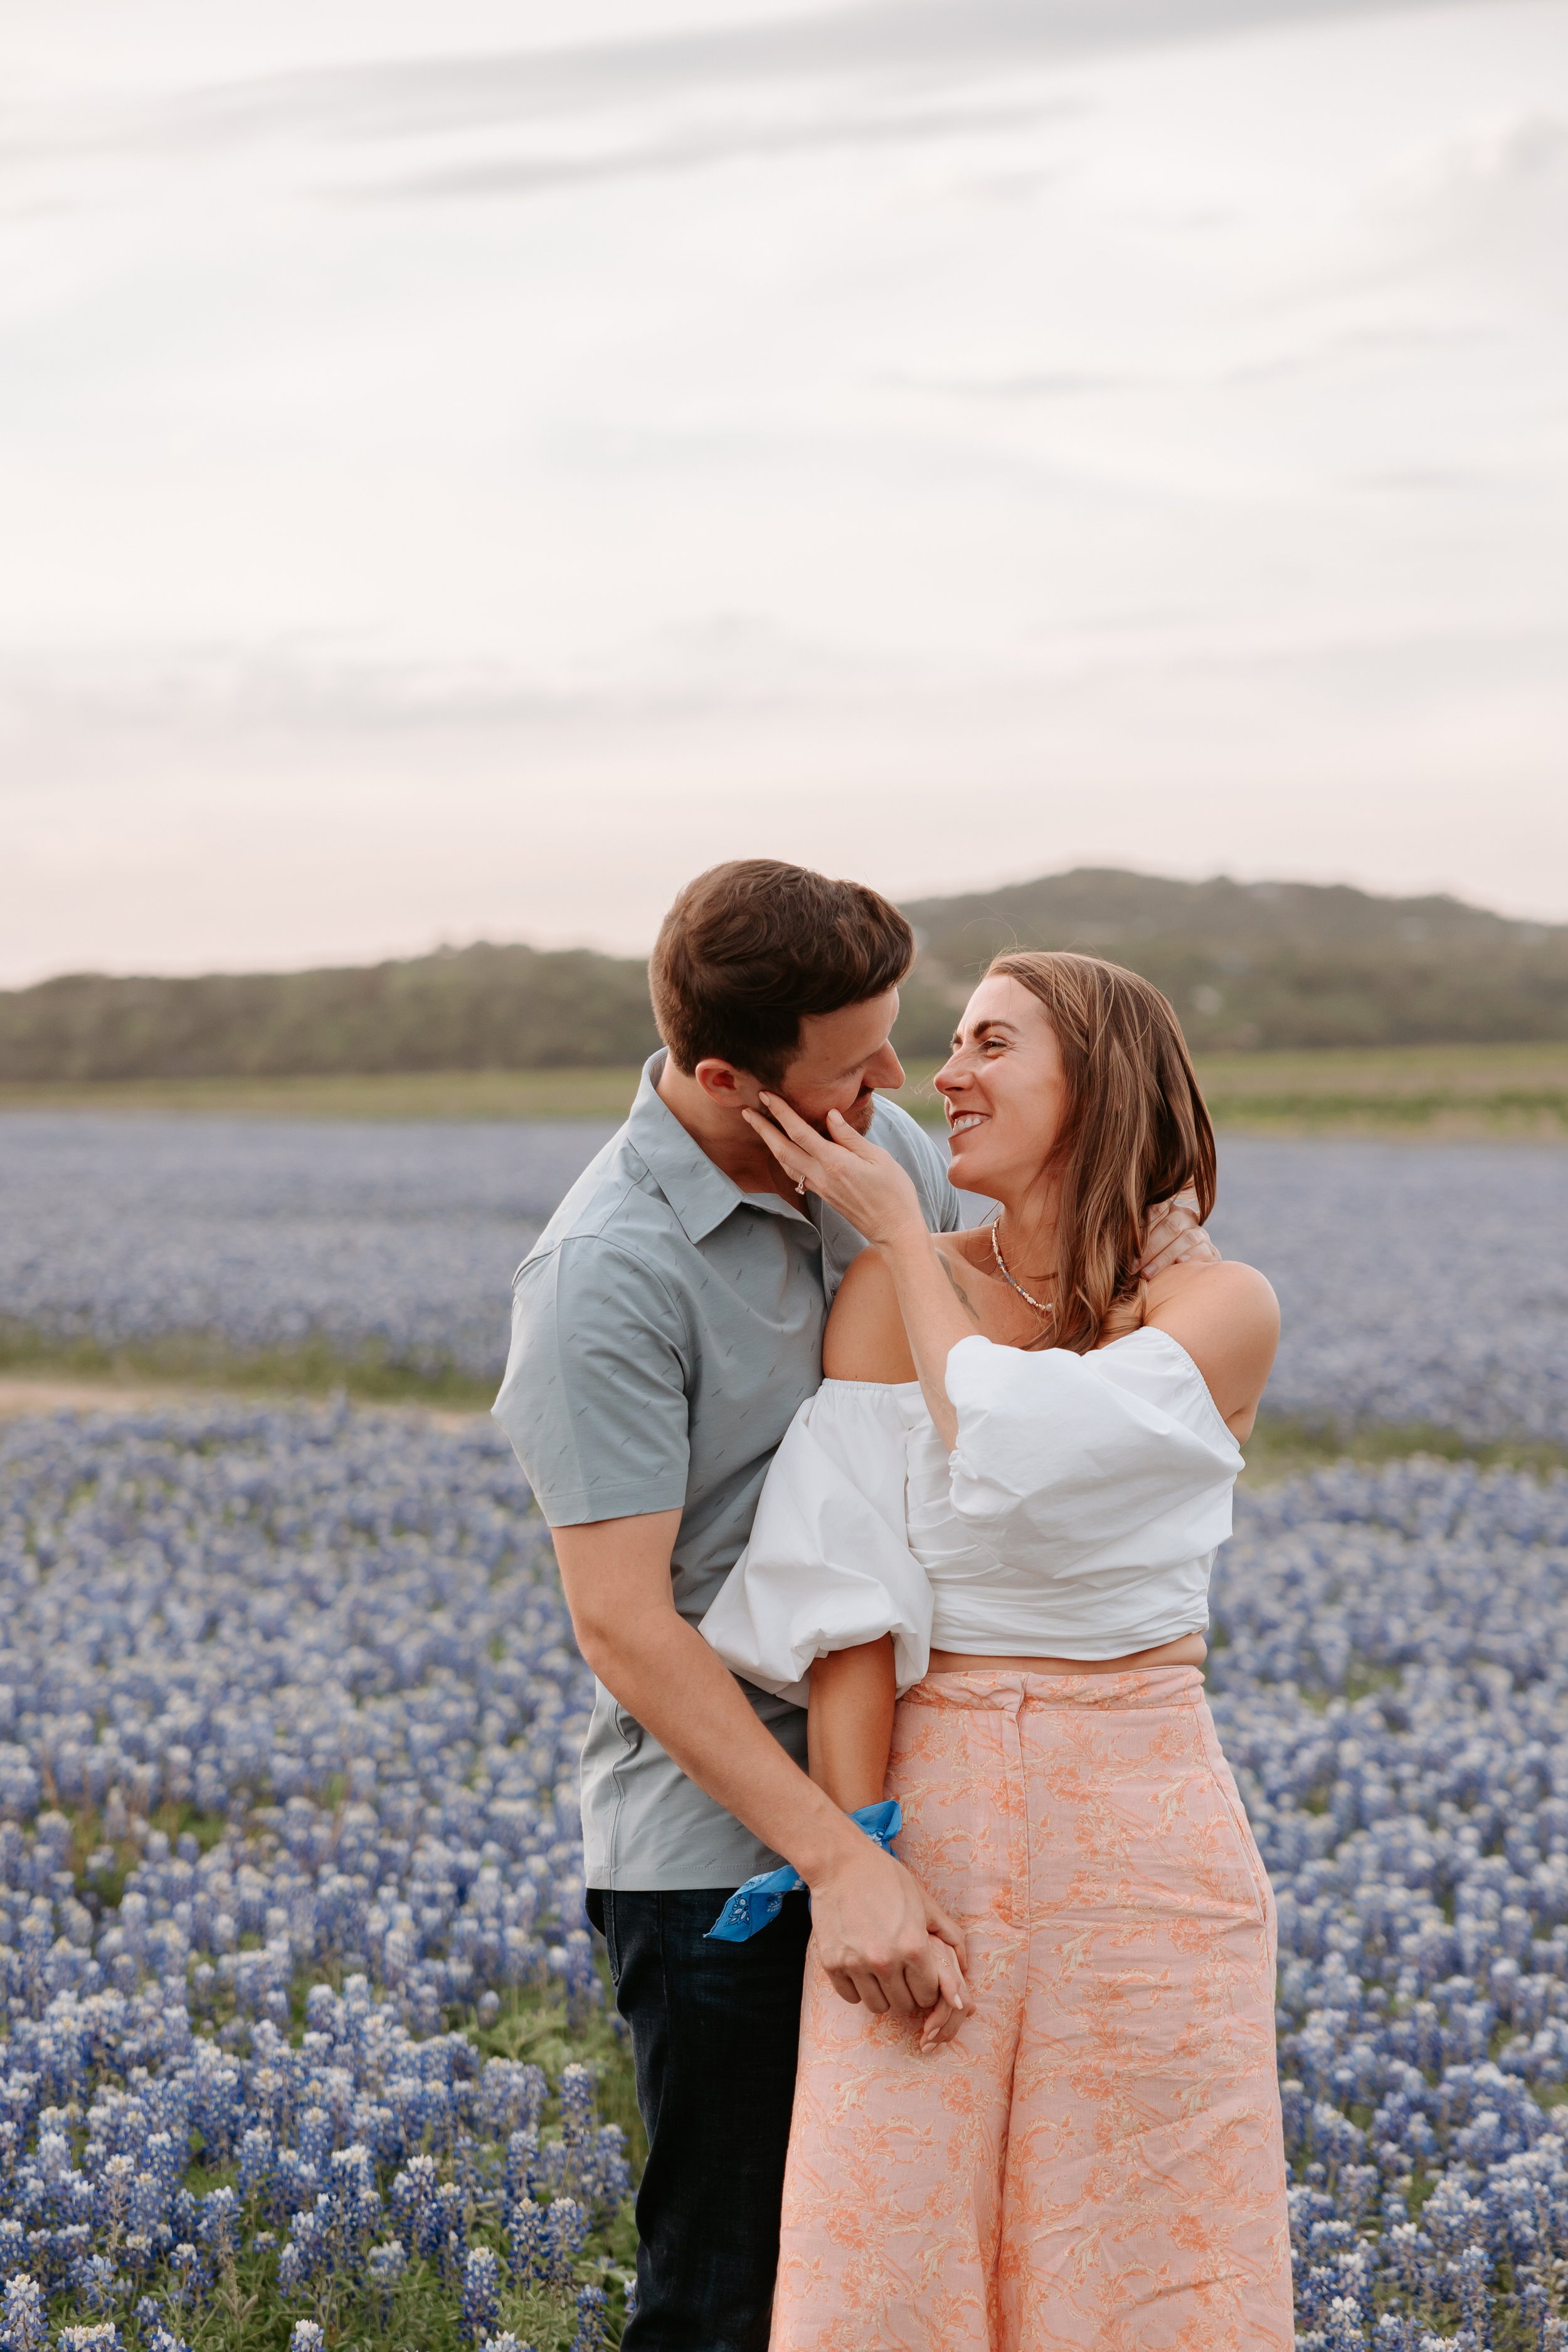 Man looks at woman in a field of blue flowers.